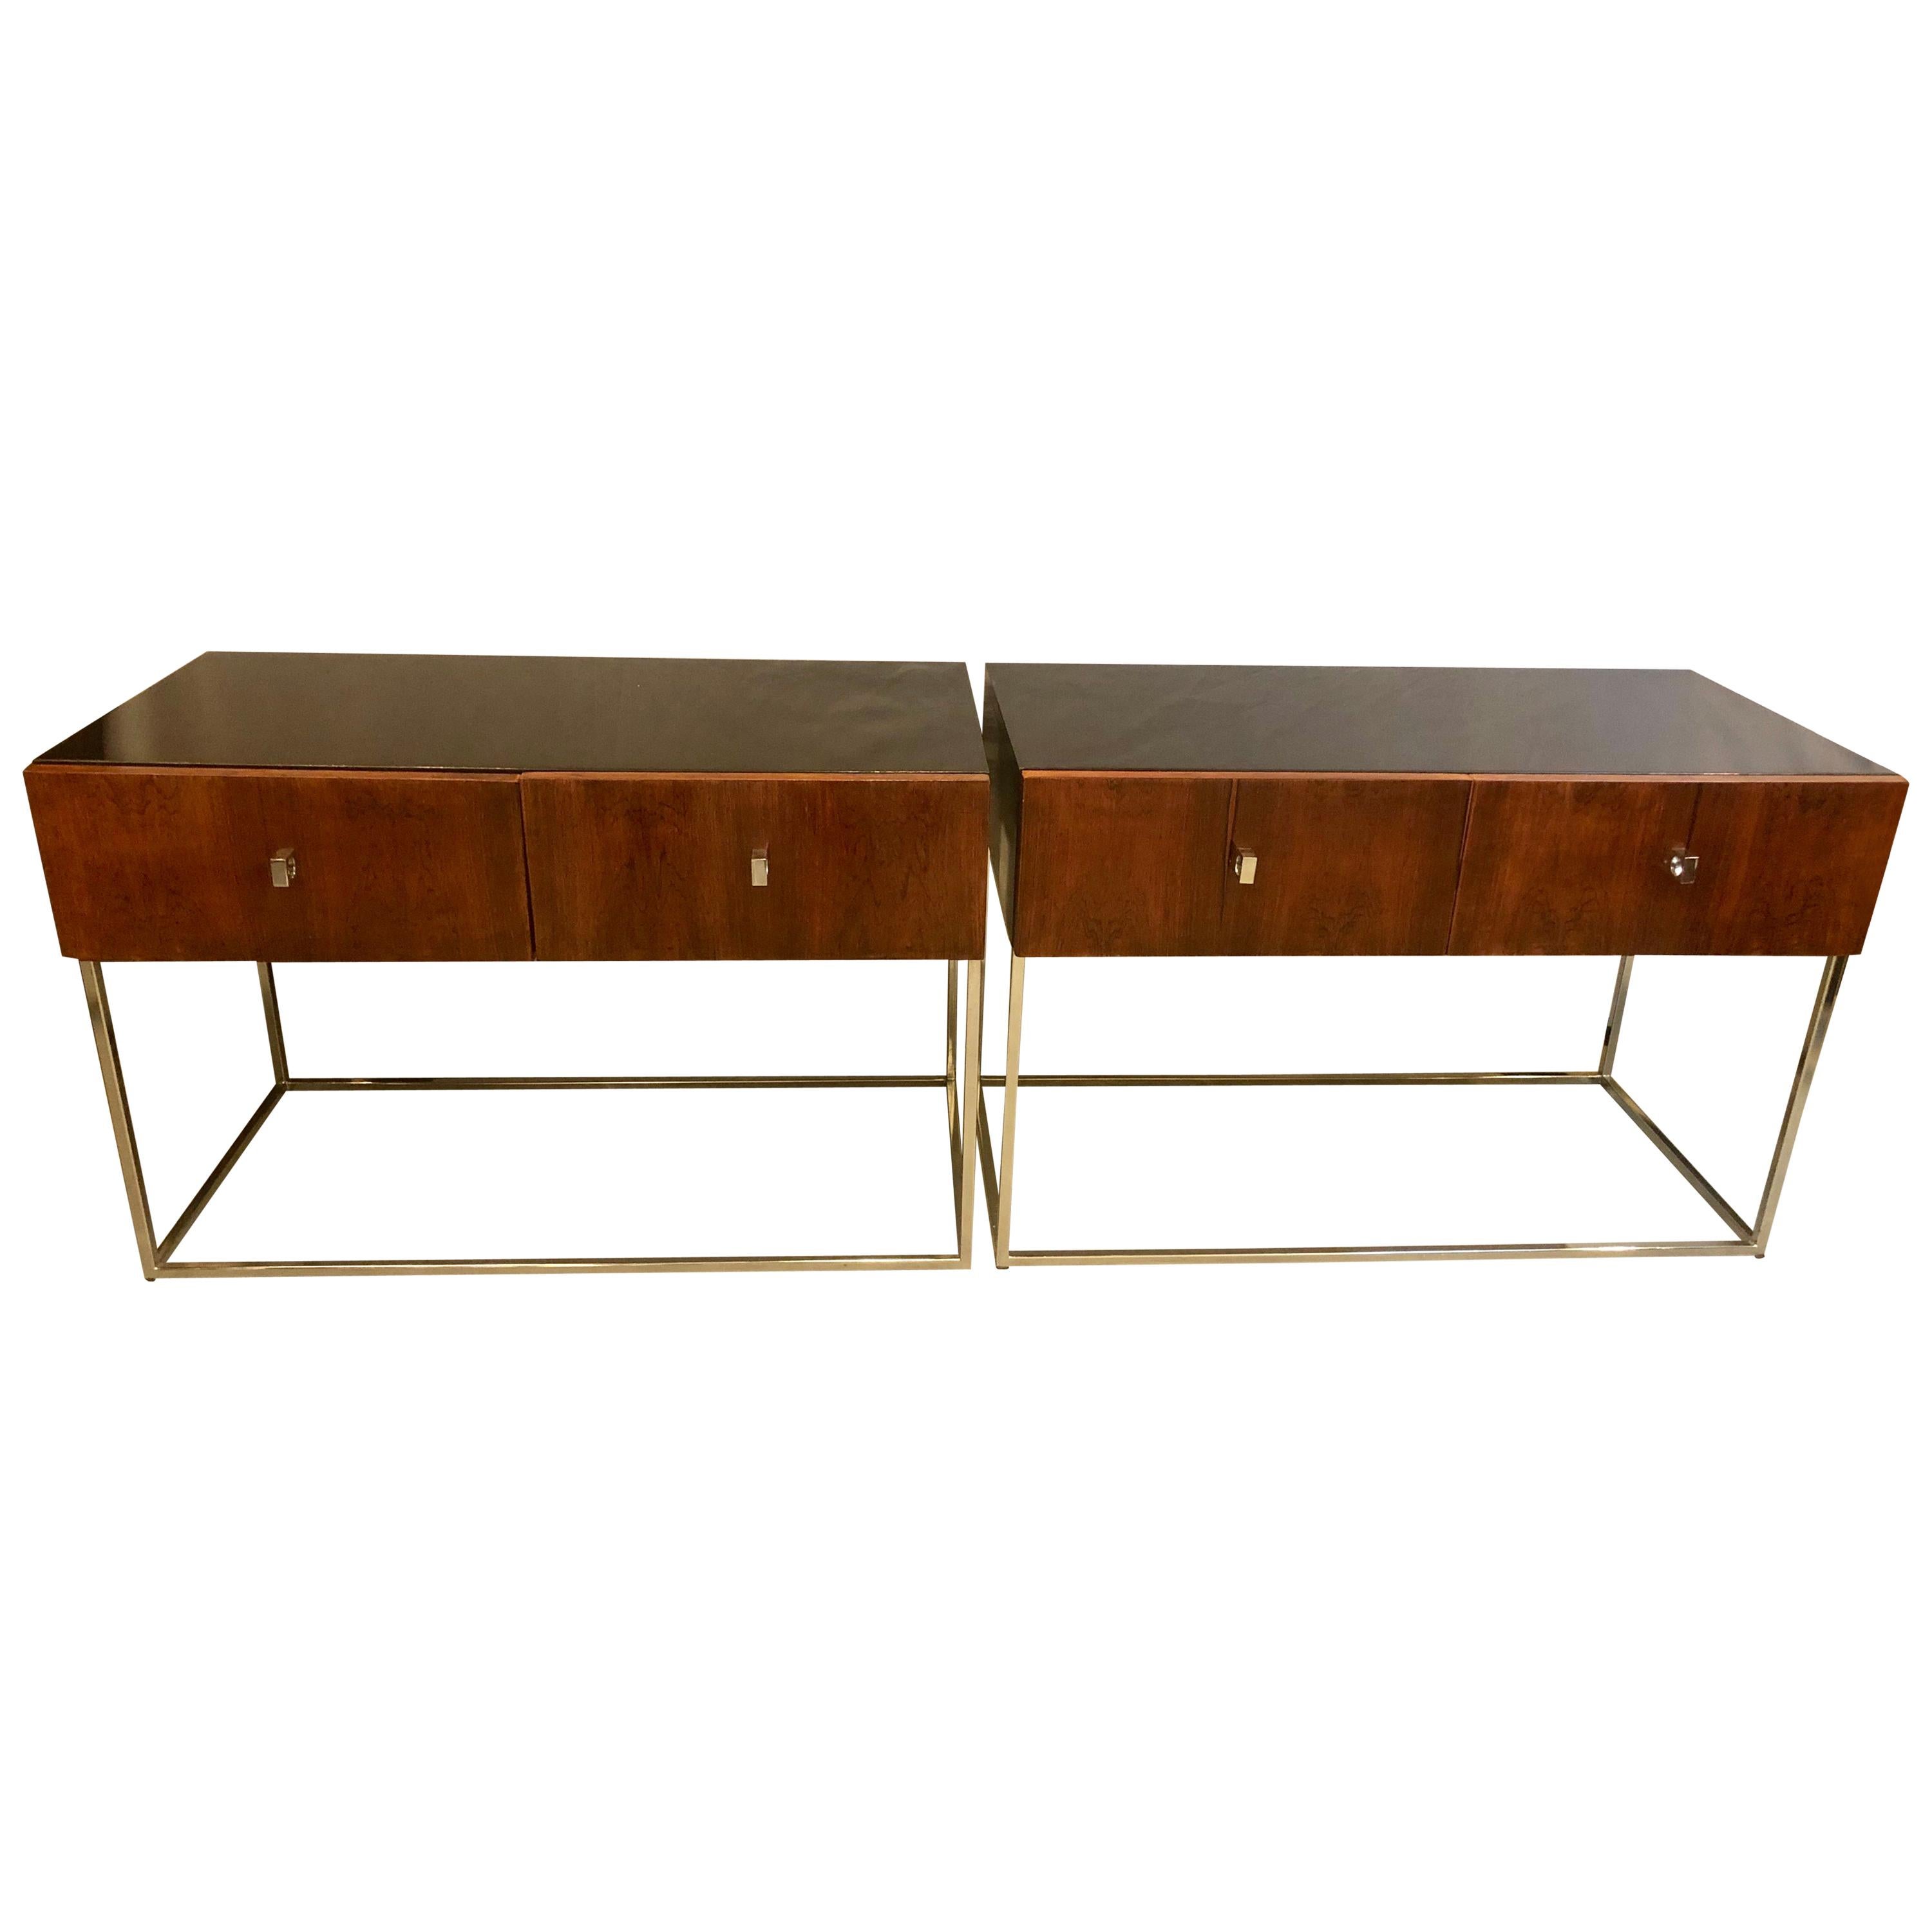 Pair of Mid-Century Modern Rougier Ebony Rosewood Tables, Commodes, Nightstands